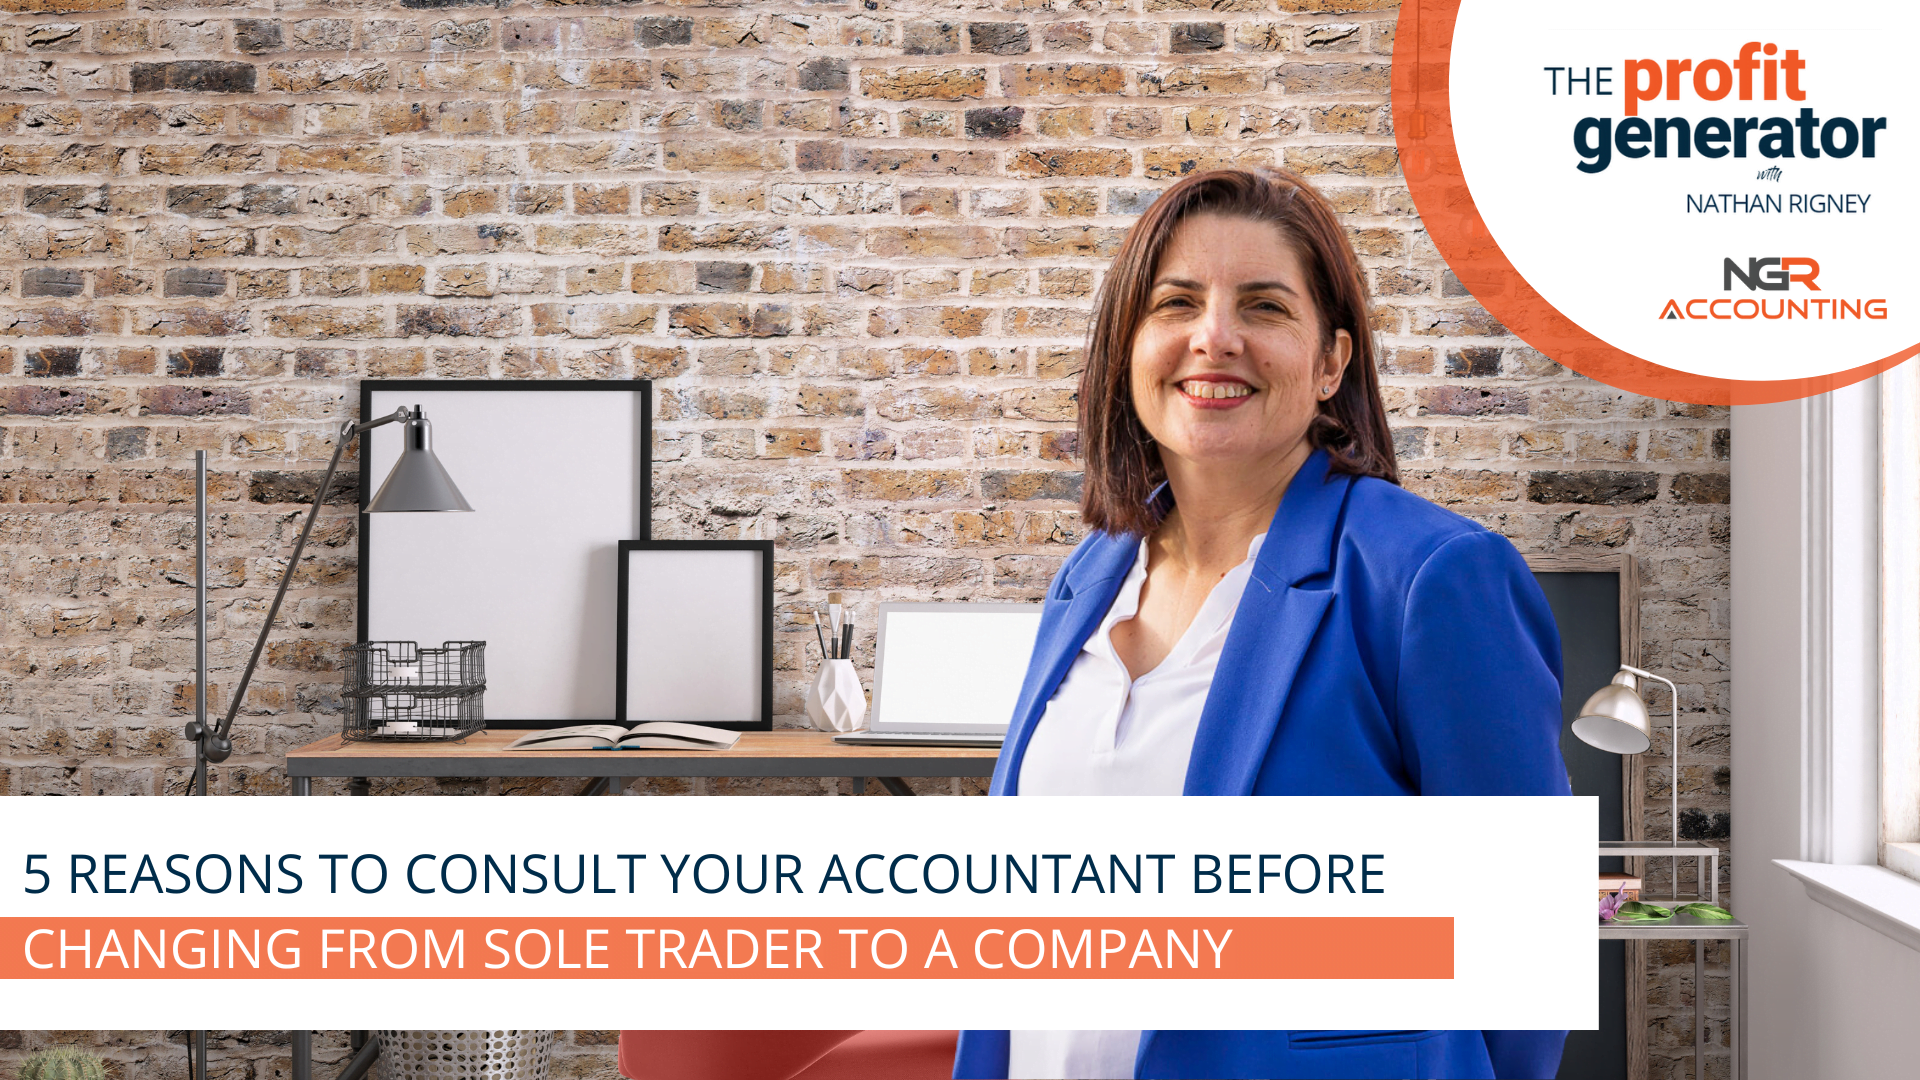 5 Reasons to Consult your Accountant before Changing from Sole Trader to a Company